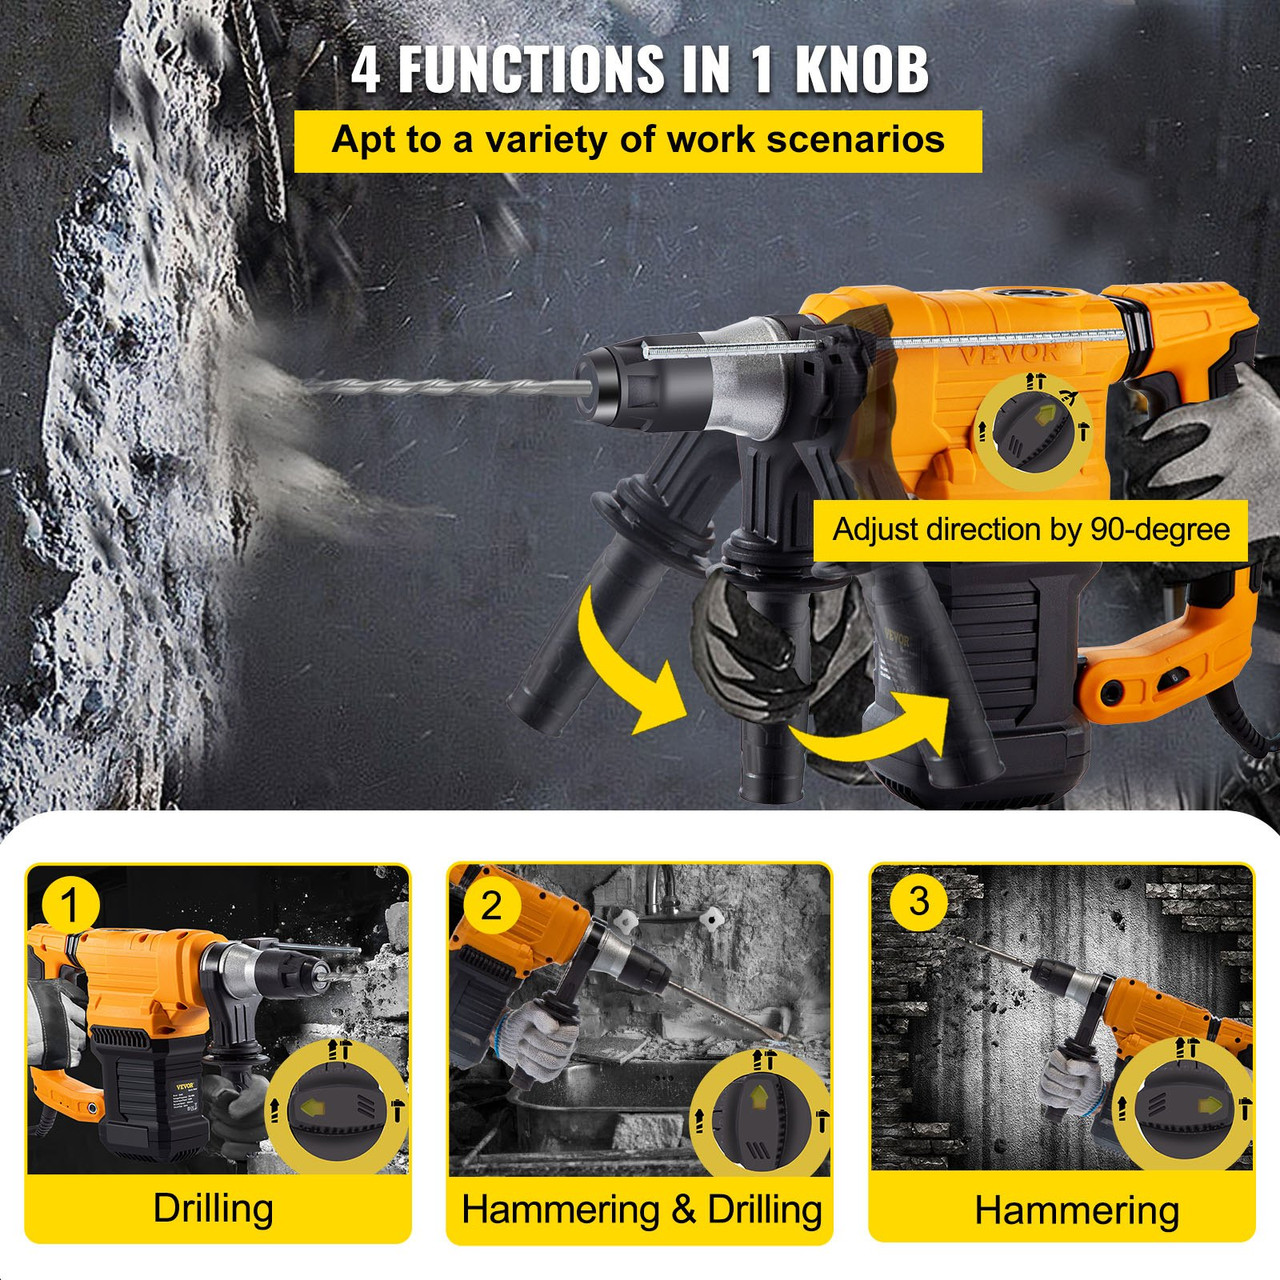 Rotary Hammer, 1' SDS - Plus Hammer Drill with 4 Functions & 360 Degree Rotating Handle, 9.5A 1050W Variable Speed 0-850RPM Corded Hammering Machine, Includes Chisels, Drill Bits and Case